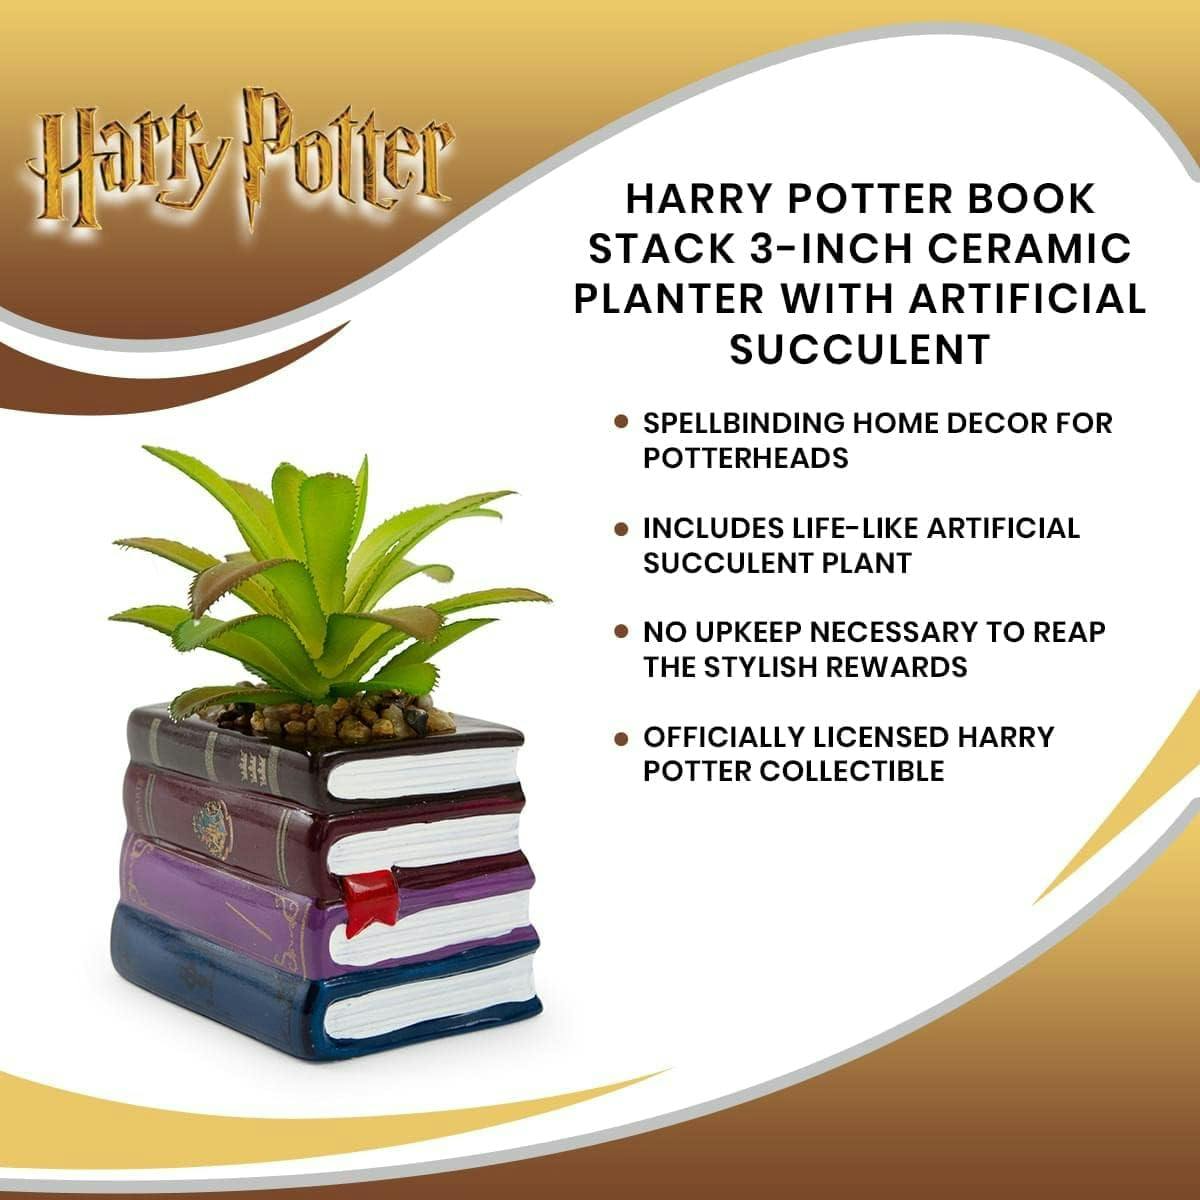 Enchanted Hogwarts Book Stack 3" Ceramic Planter with Faux Succulent